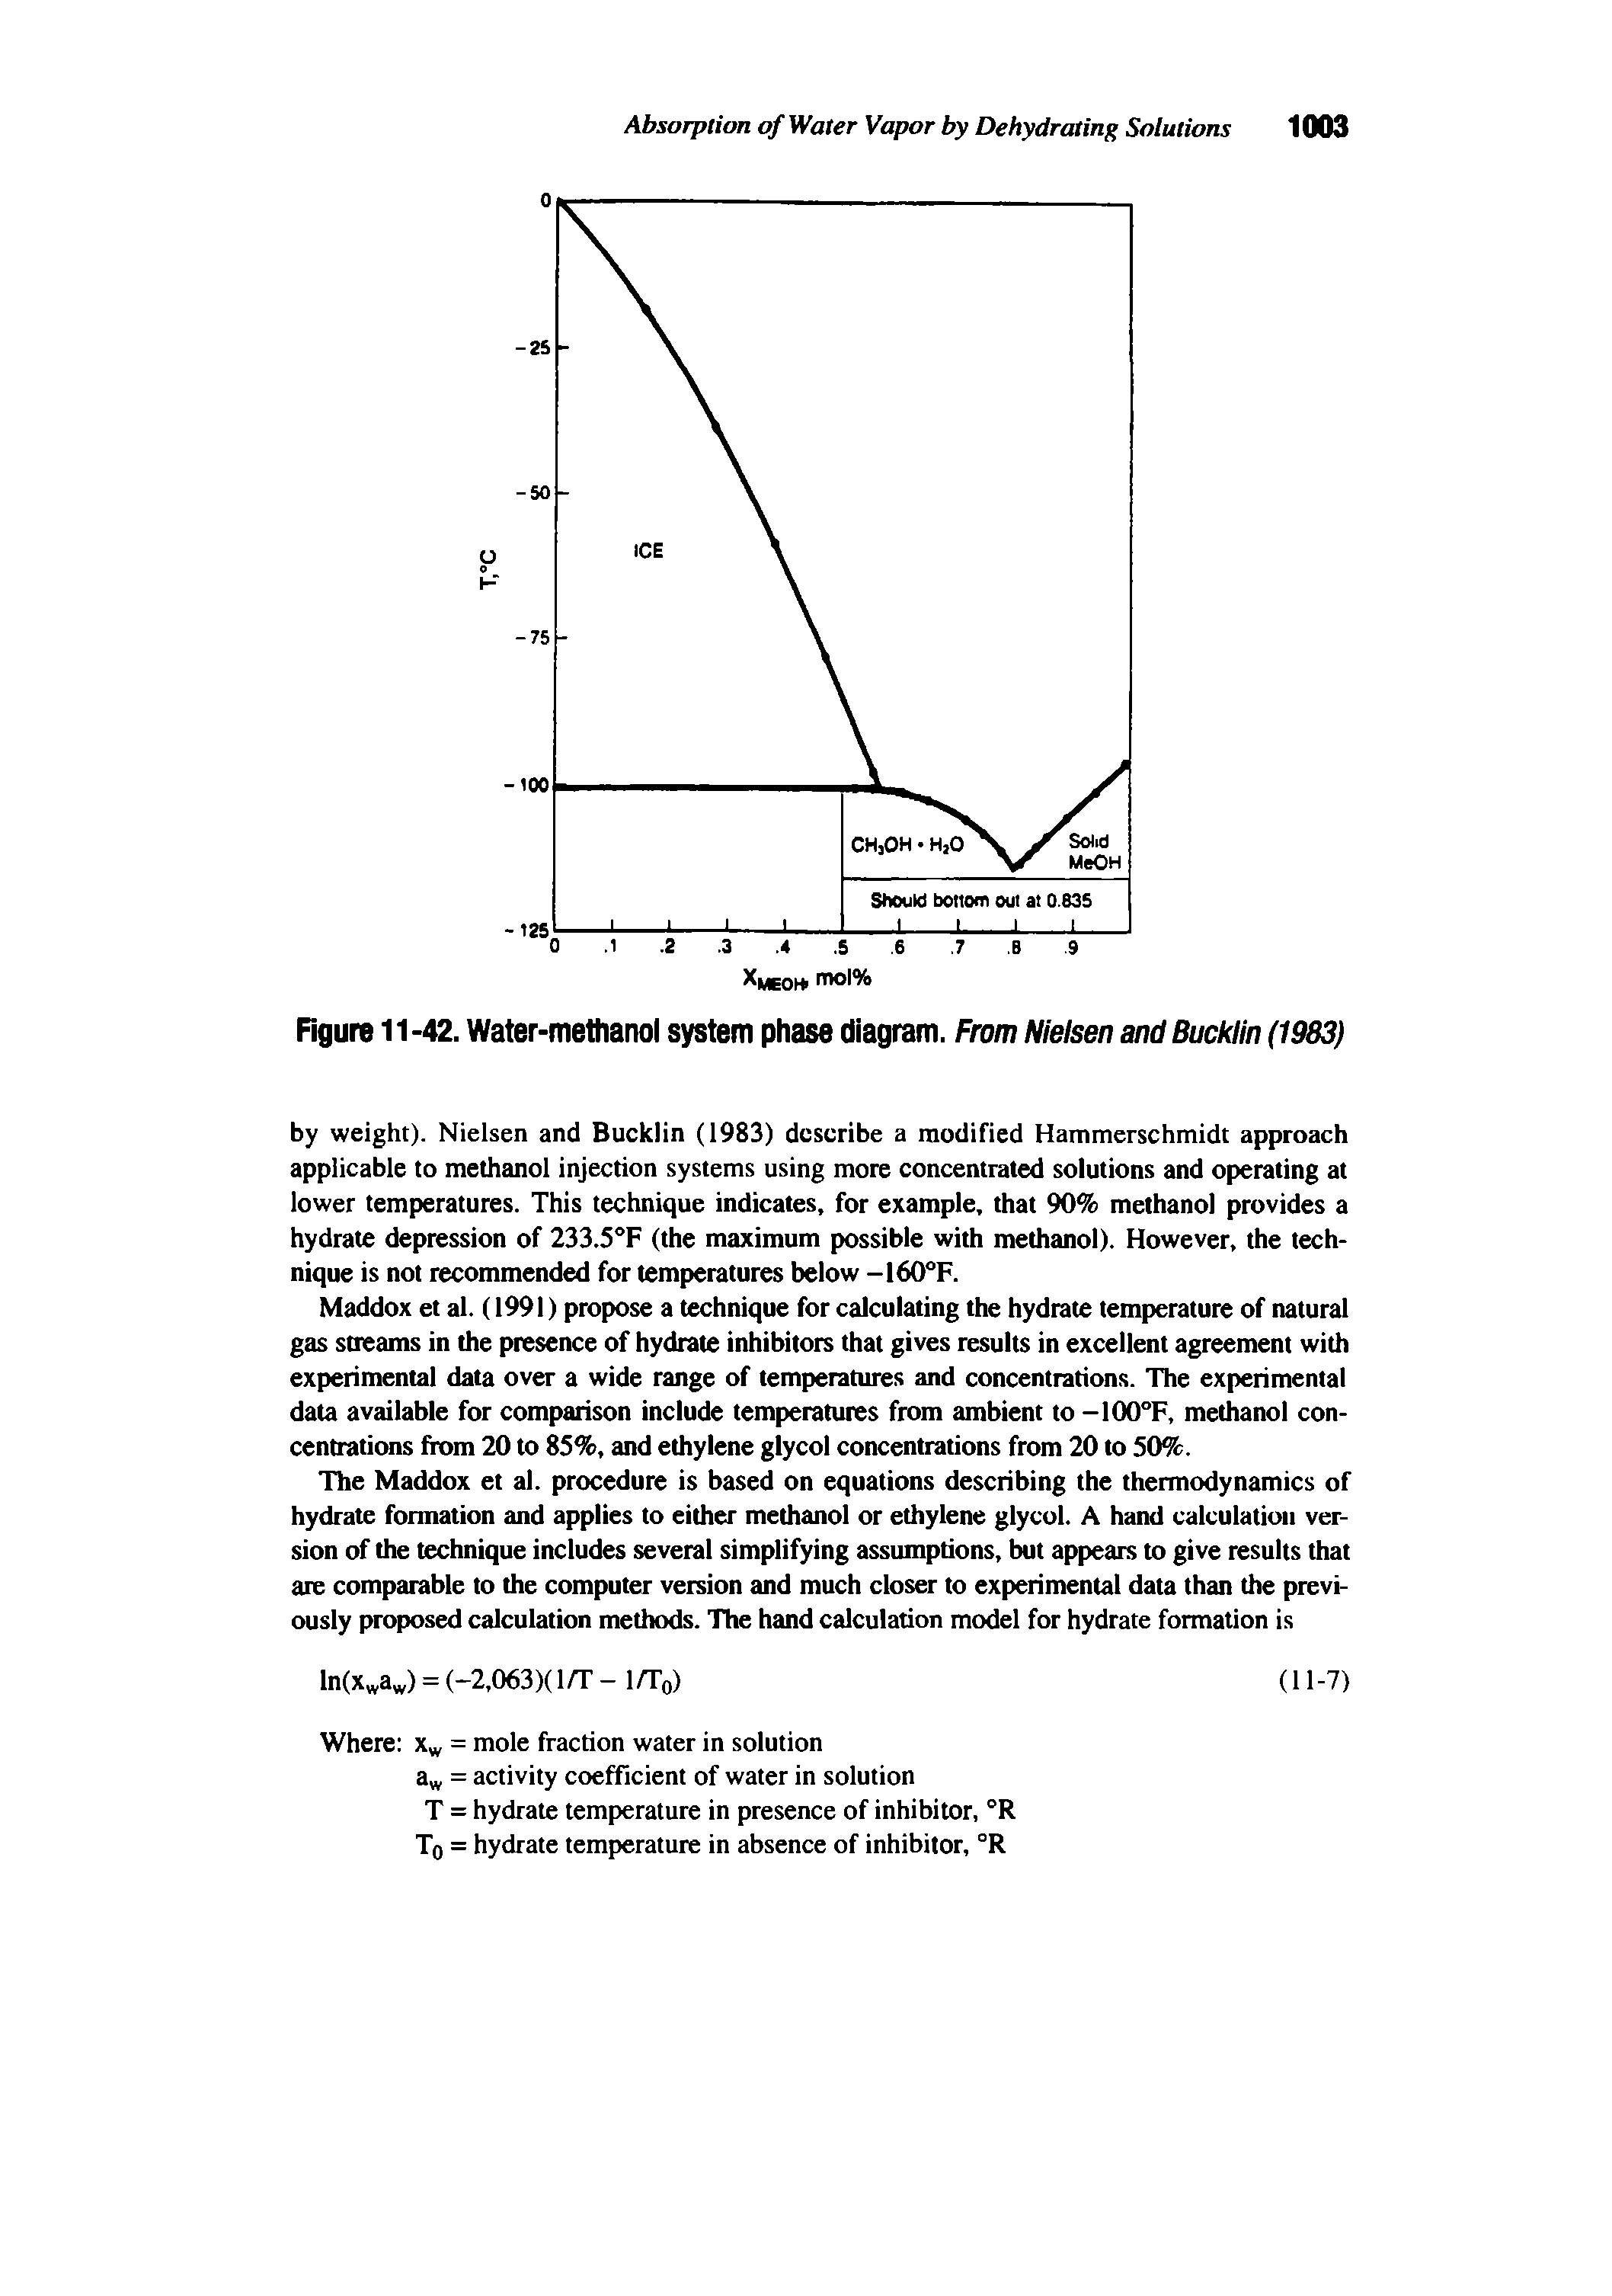 Figure 11 -42. Water-methanol system phase diagram. From Nielsen and Bucklin (1983)...